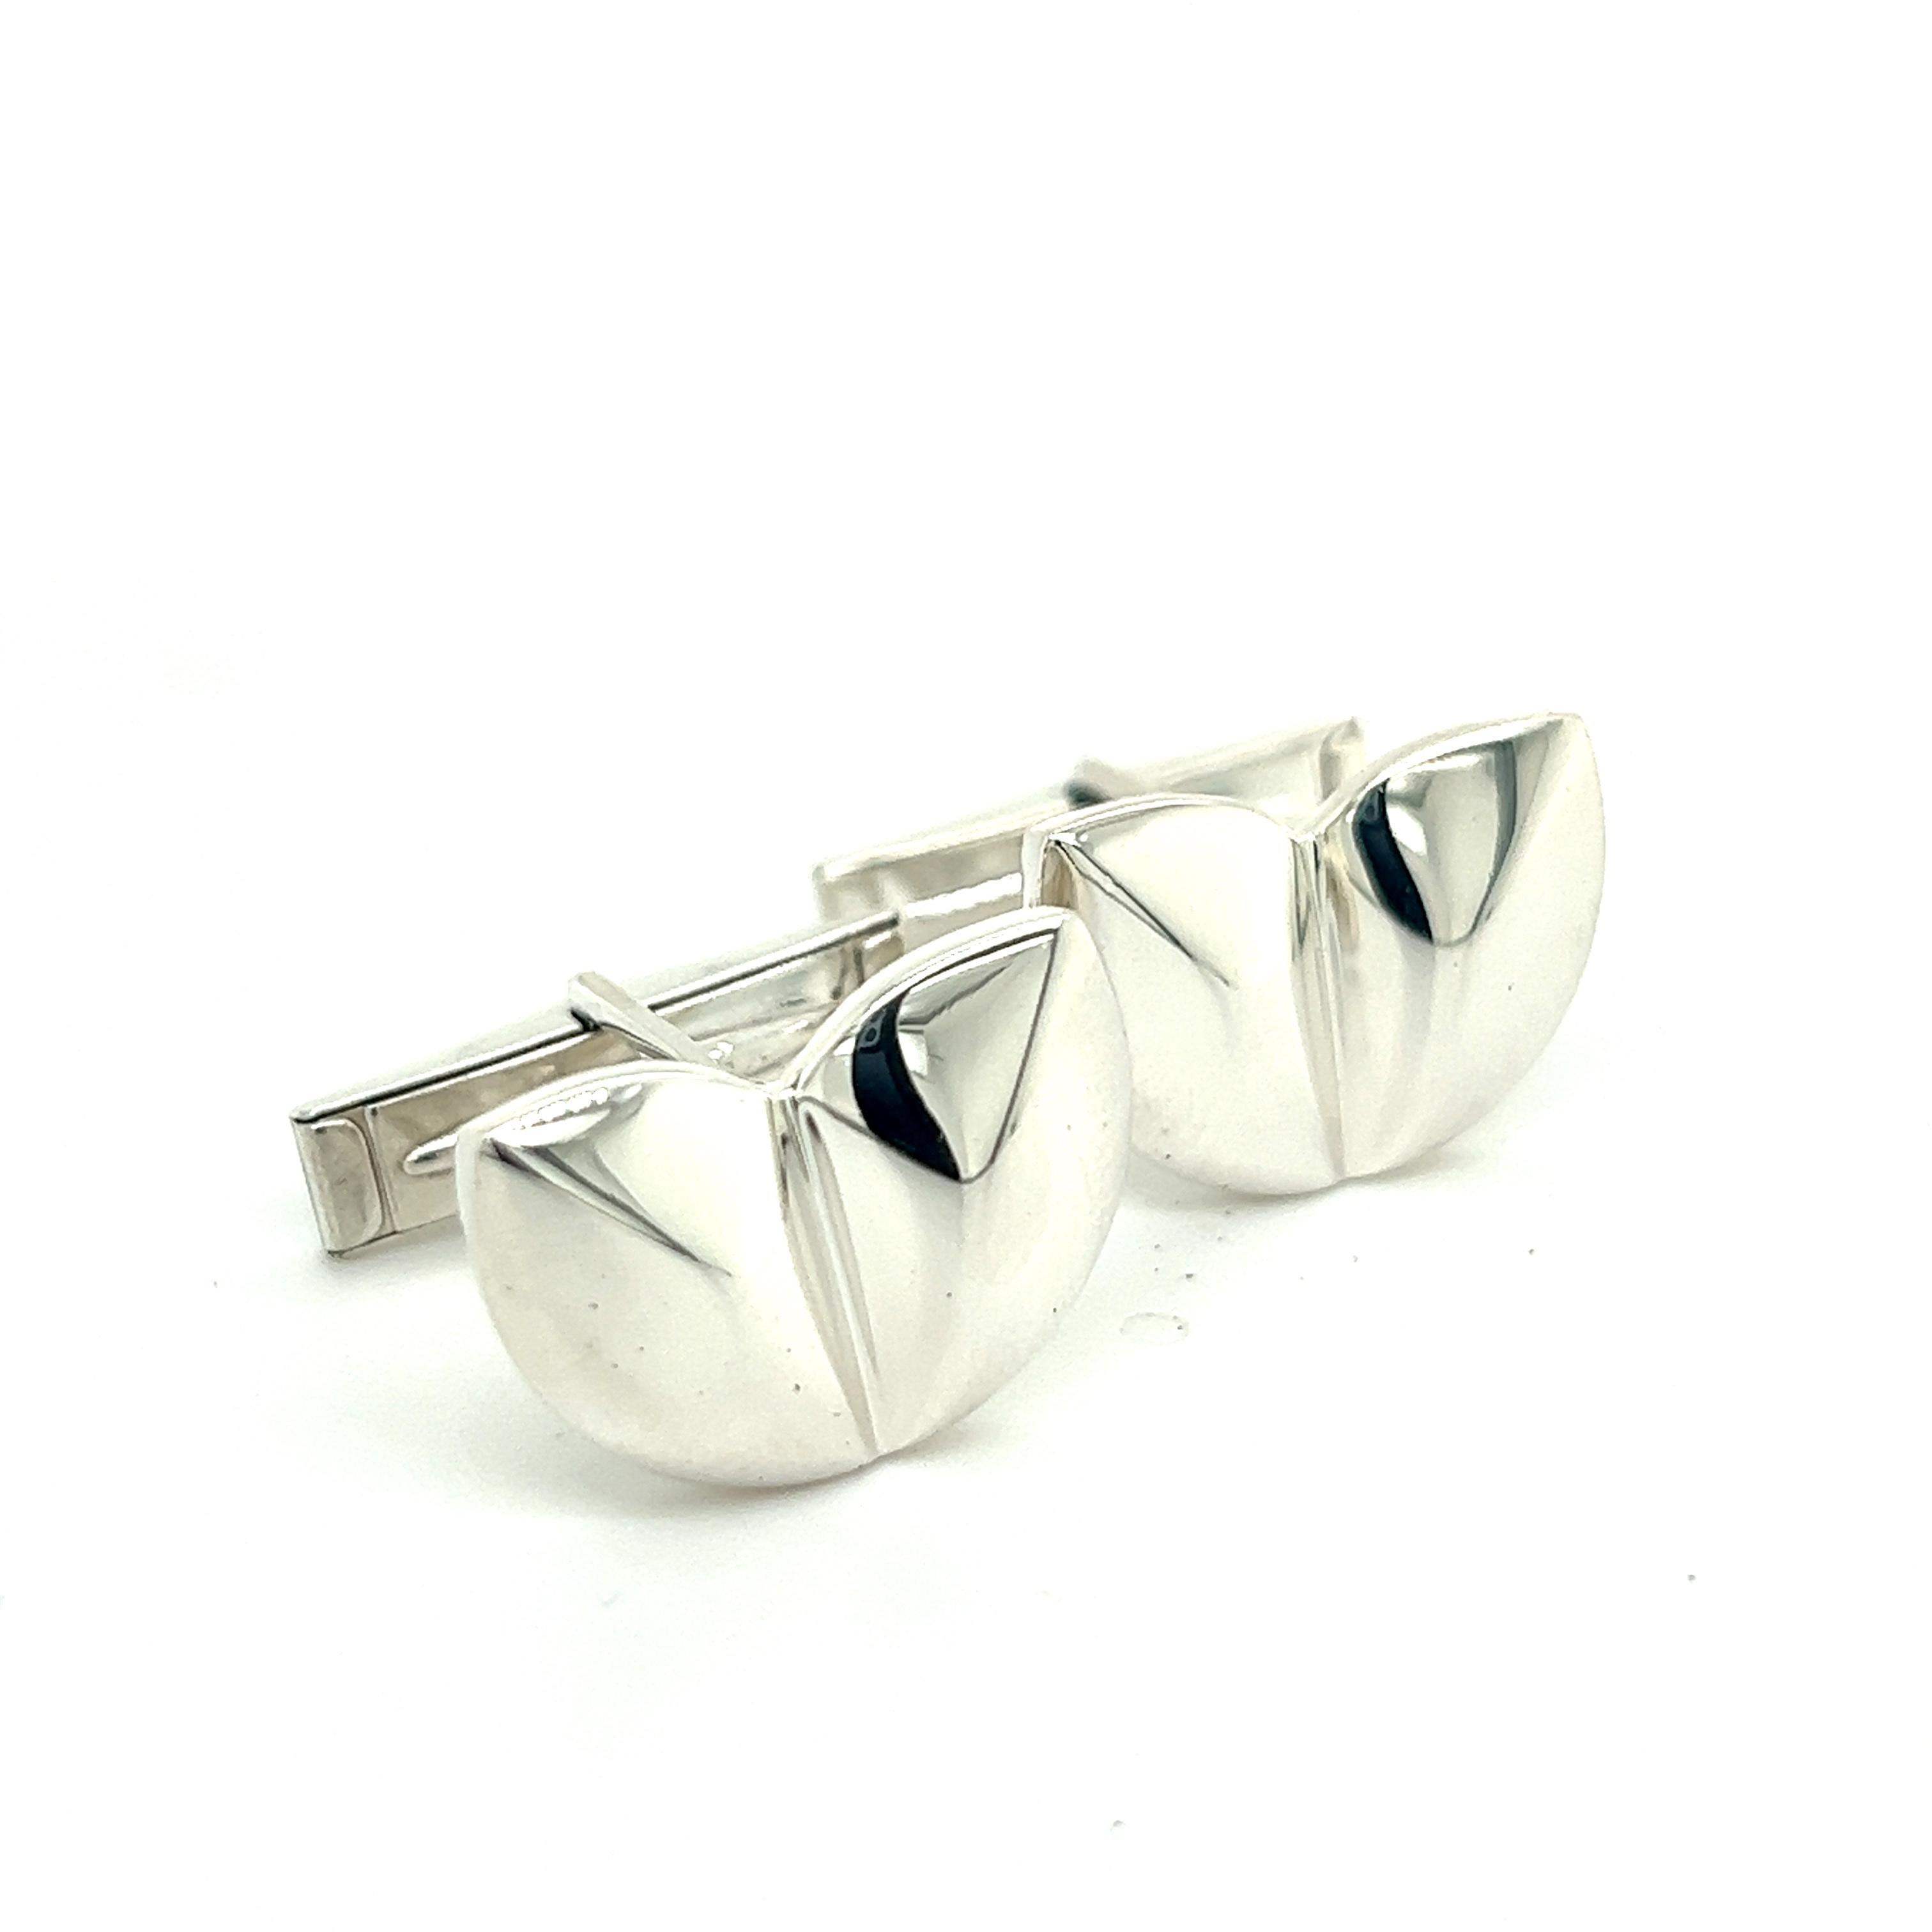 Tiffany & Co Estate Cufflinks Sterling Silver TIF305

These elegant Authentic Tiffany & Co Men's Cufflinks are made of sterling silver and have a weight of 8 grams.

TRUSTED SELLER SINCE 2002

PLEASE SEE OUR HUNDREDS OF POSITIVE FEEDBACKS FROM OUR